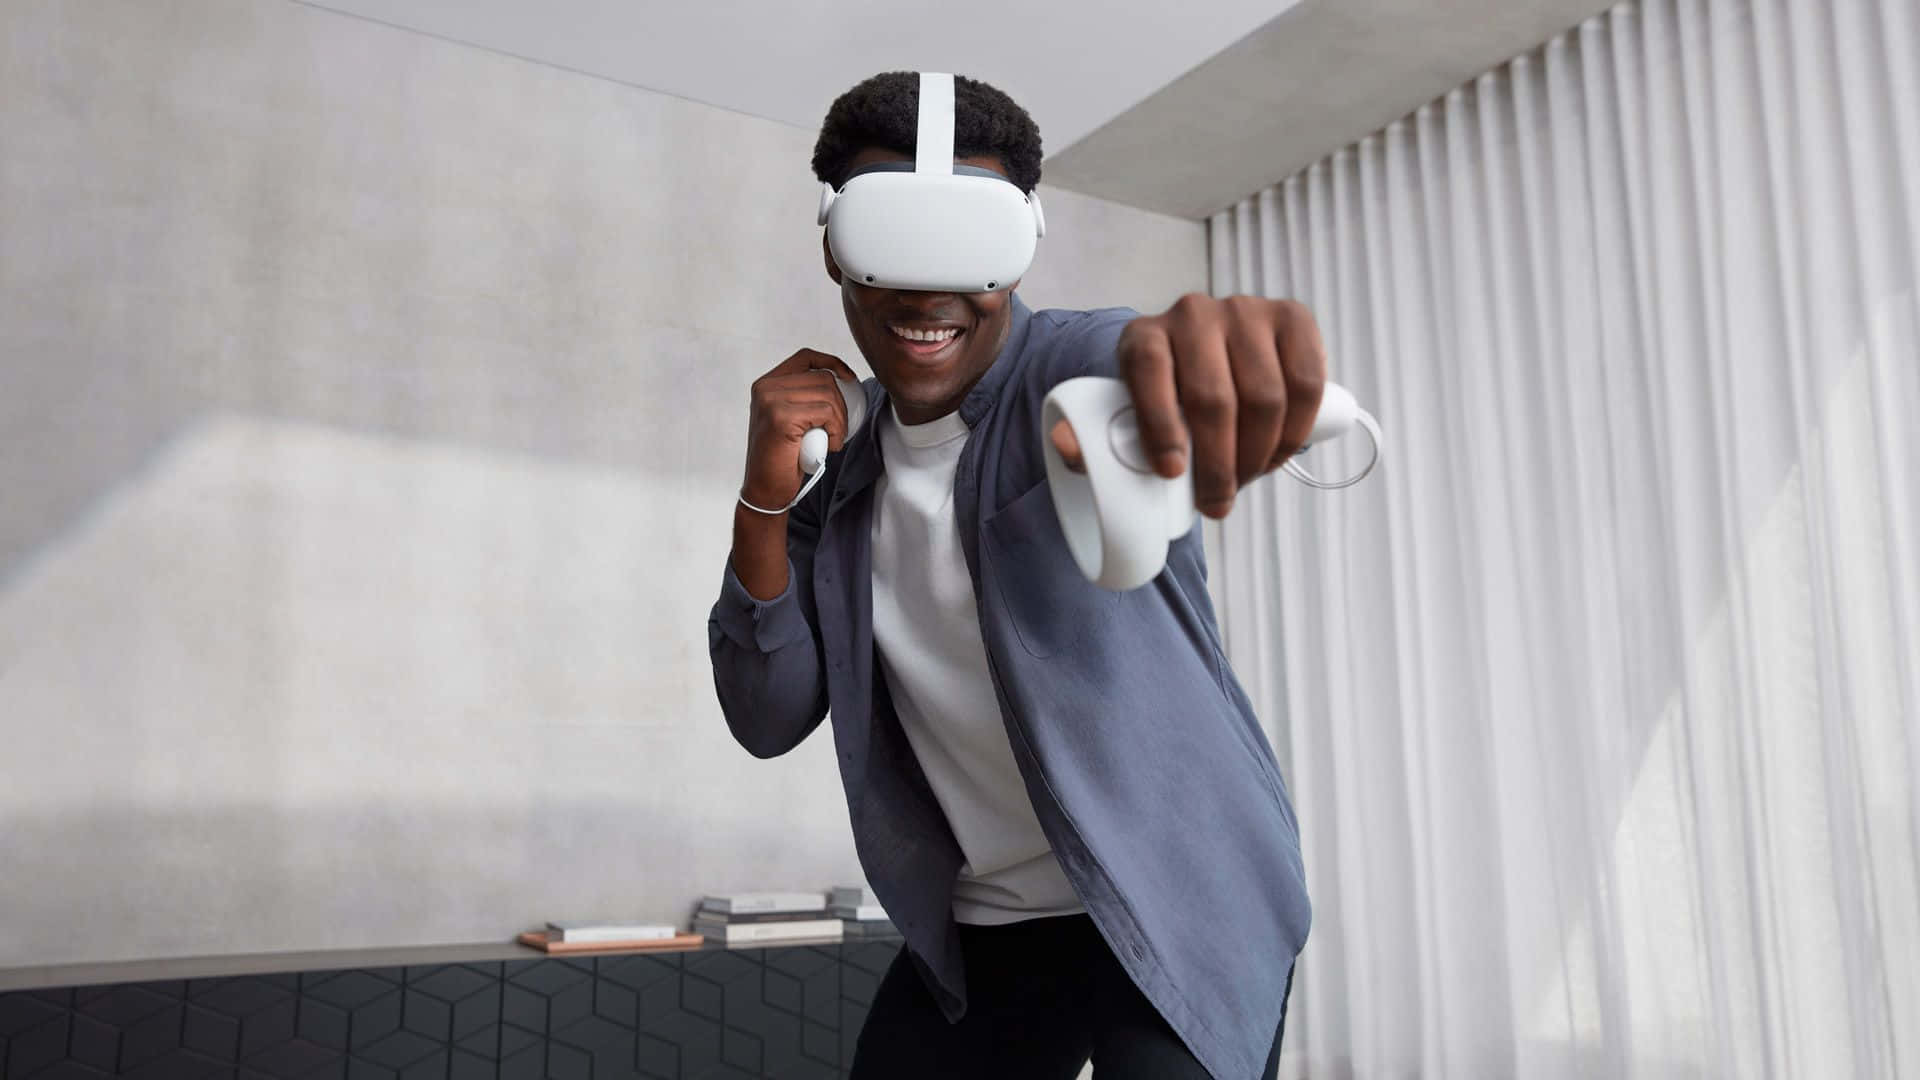 Get ready to level up with the Oculus Quest 2